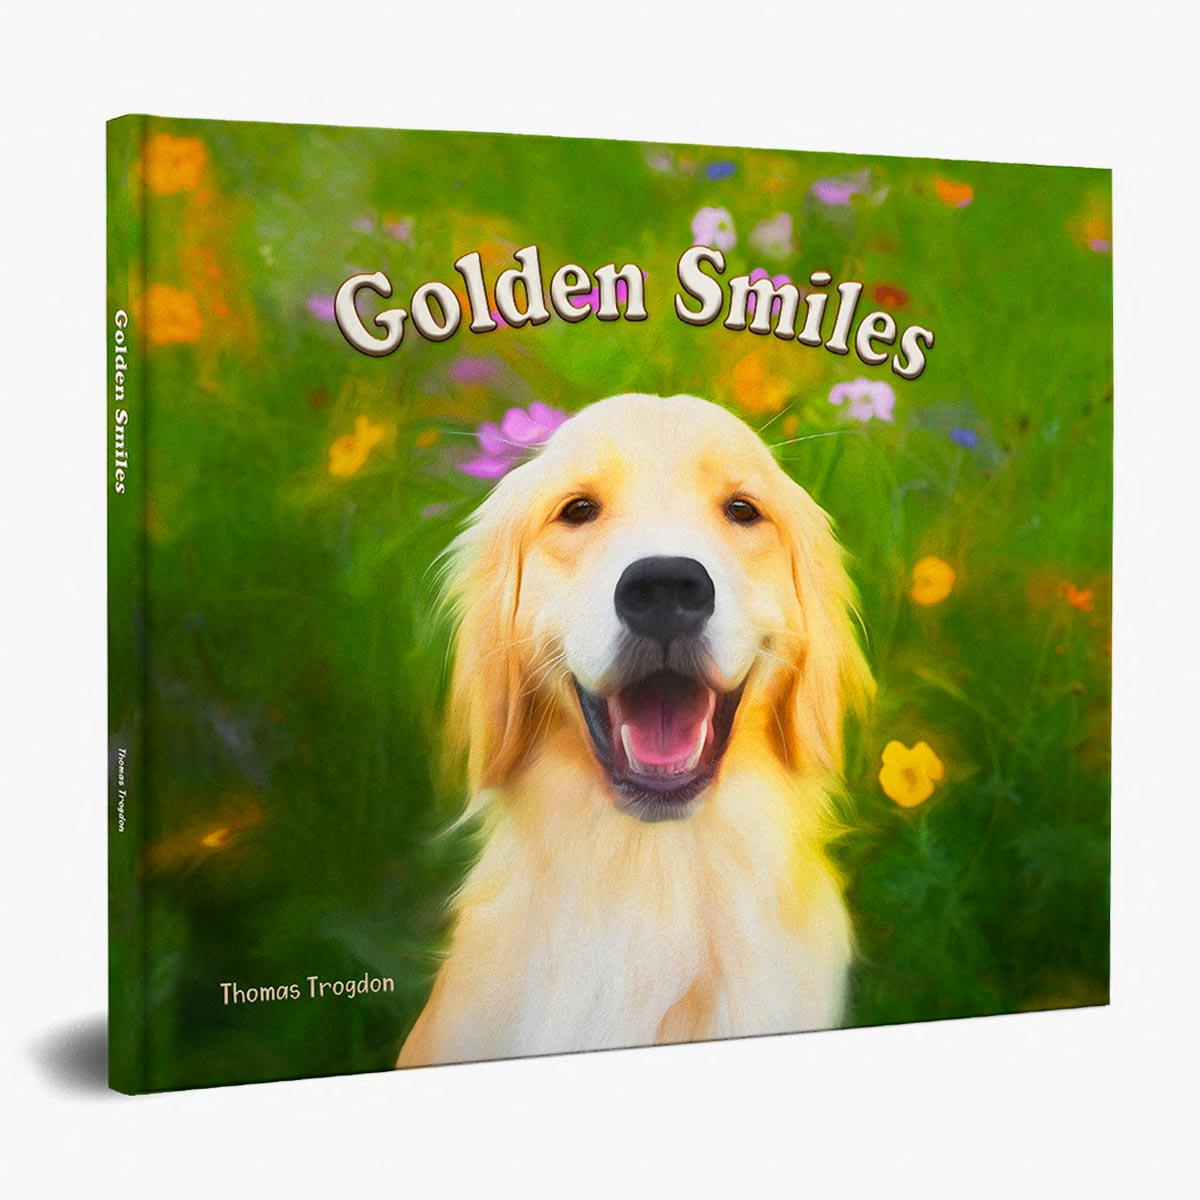 Golden Smiles Book Cover for Featured Image